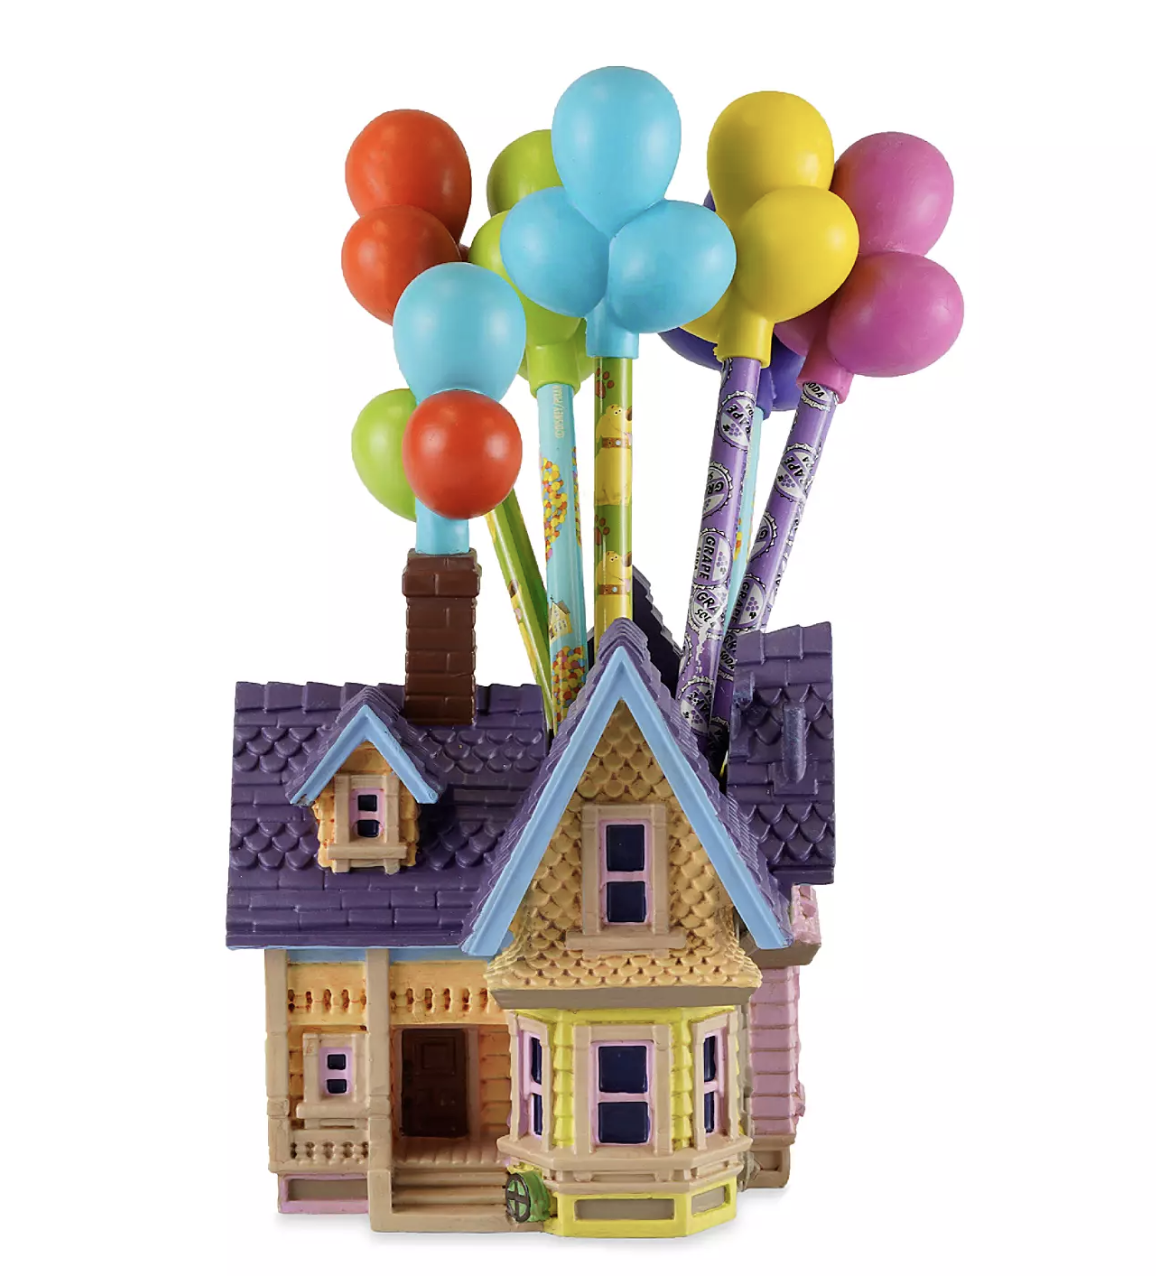 A mini version of the house from Up with pencils in the roof that look like balloons 